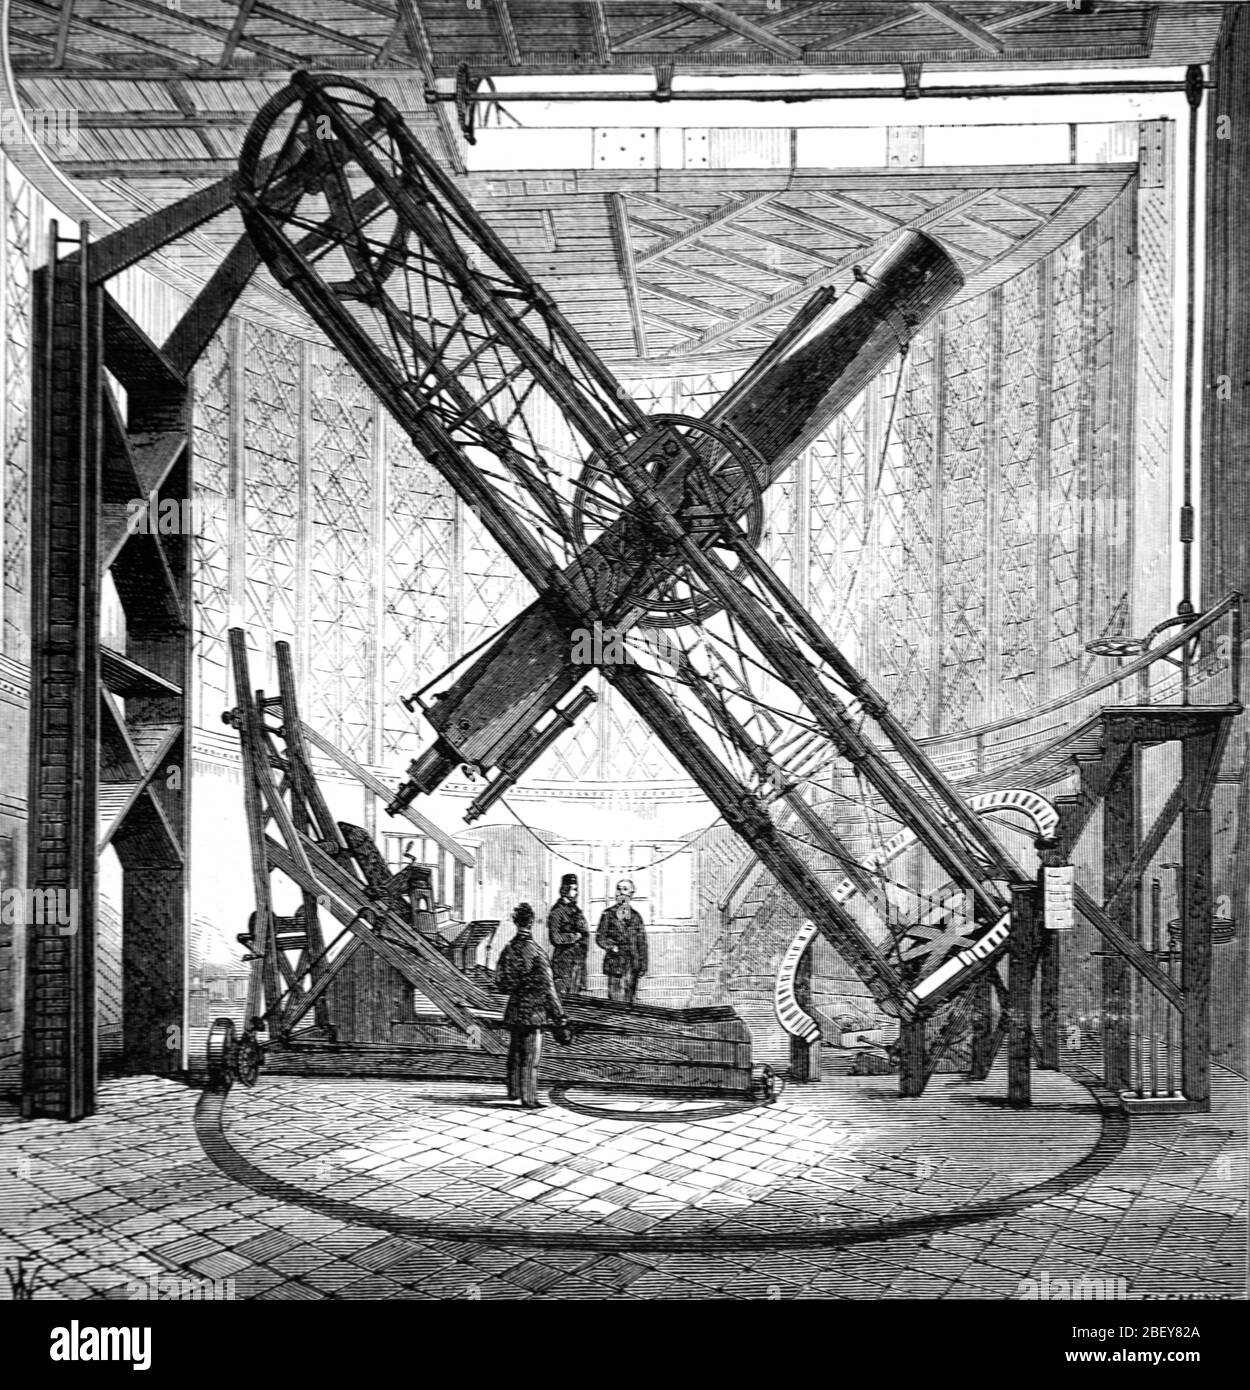 Sheepshanks Equatorial Telescope at Royal Greenwich Observatory Greenwich London England UK. Vintage or Old Illustration or Engraving 1888 Stock Photo